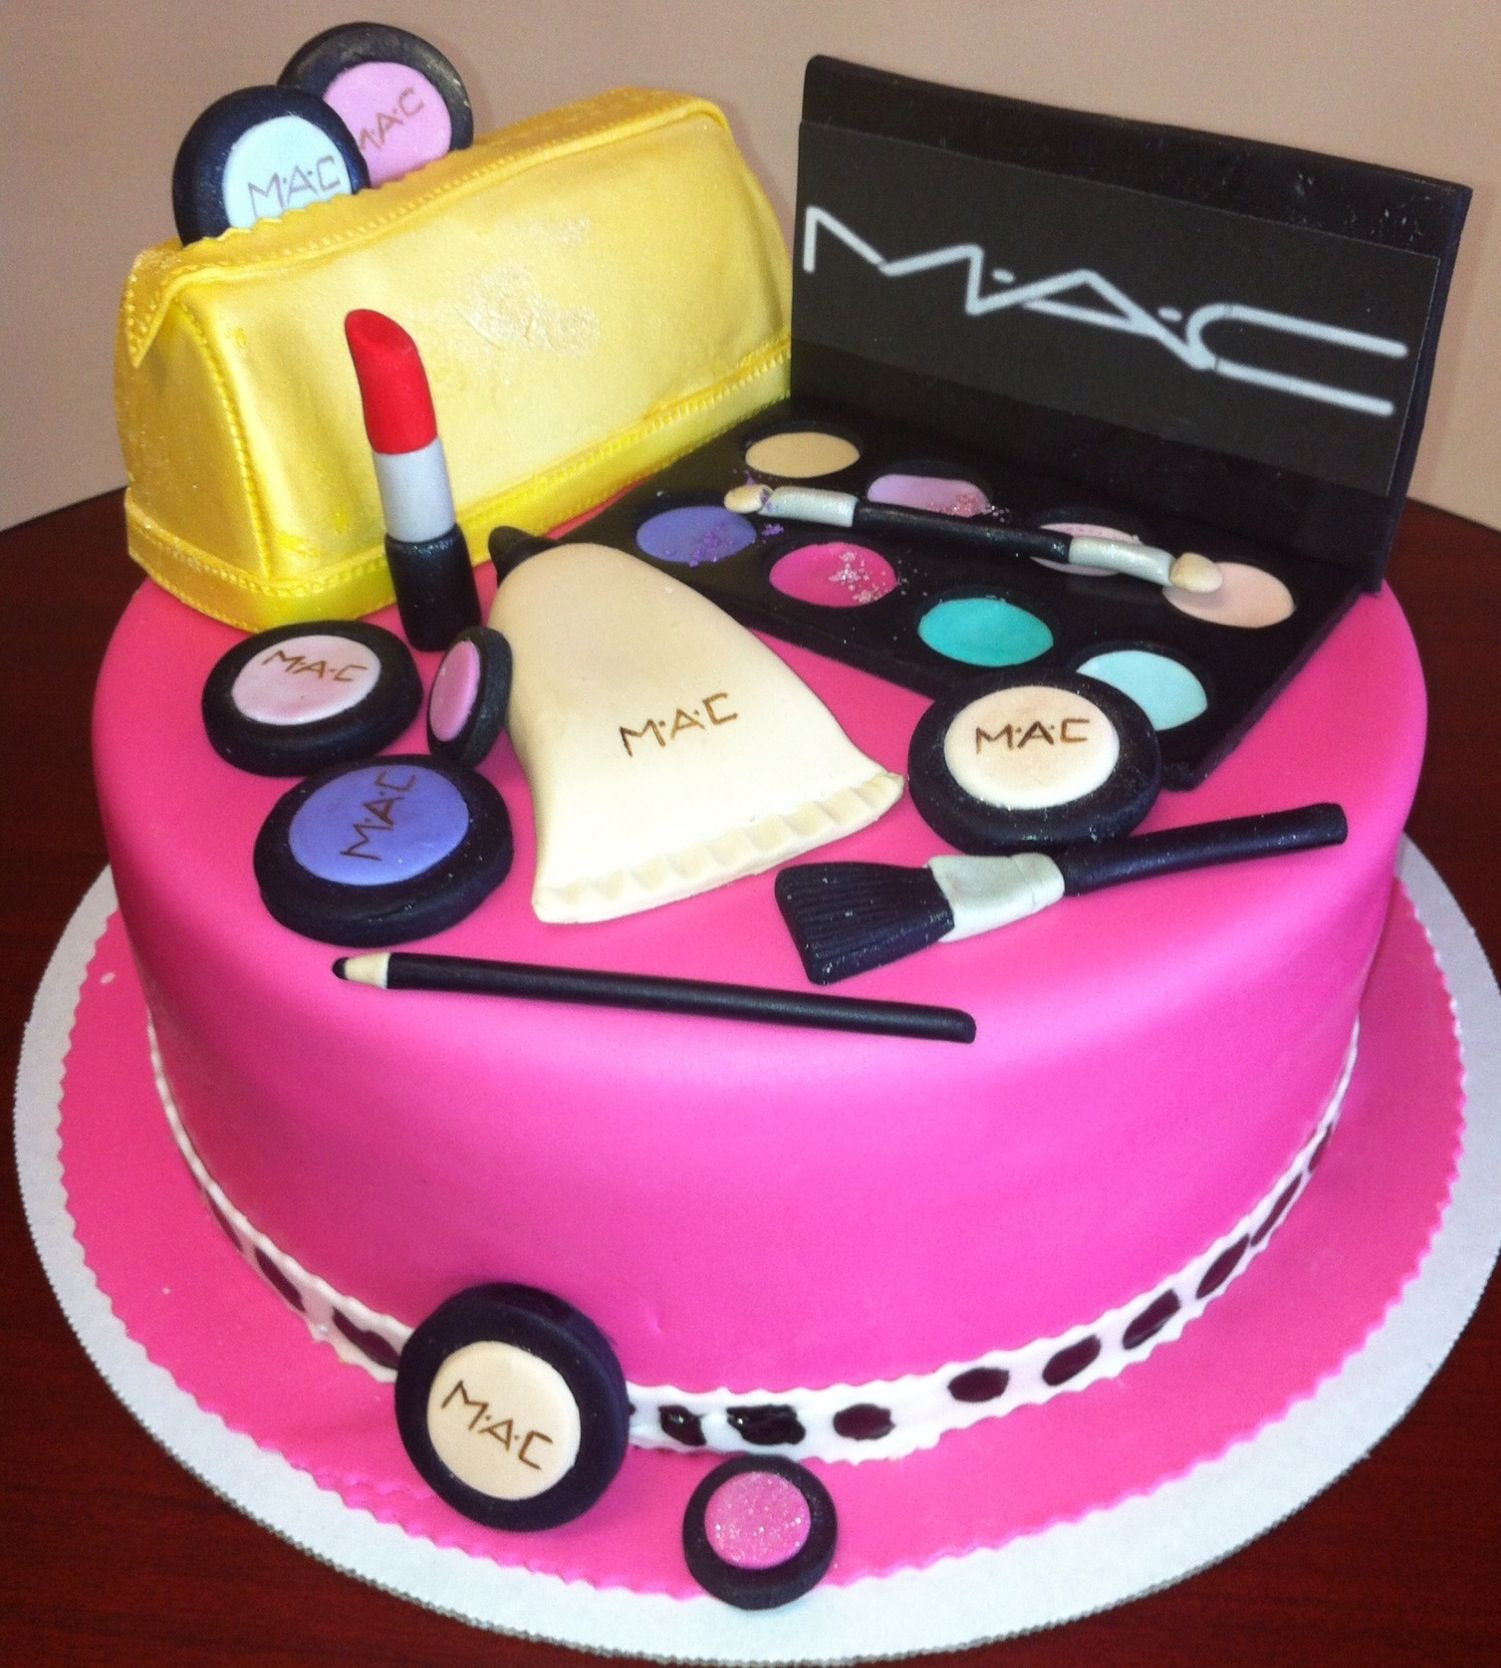 Makeup Birthday Cake
 Another cute Makeup Birthday cake Younique